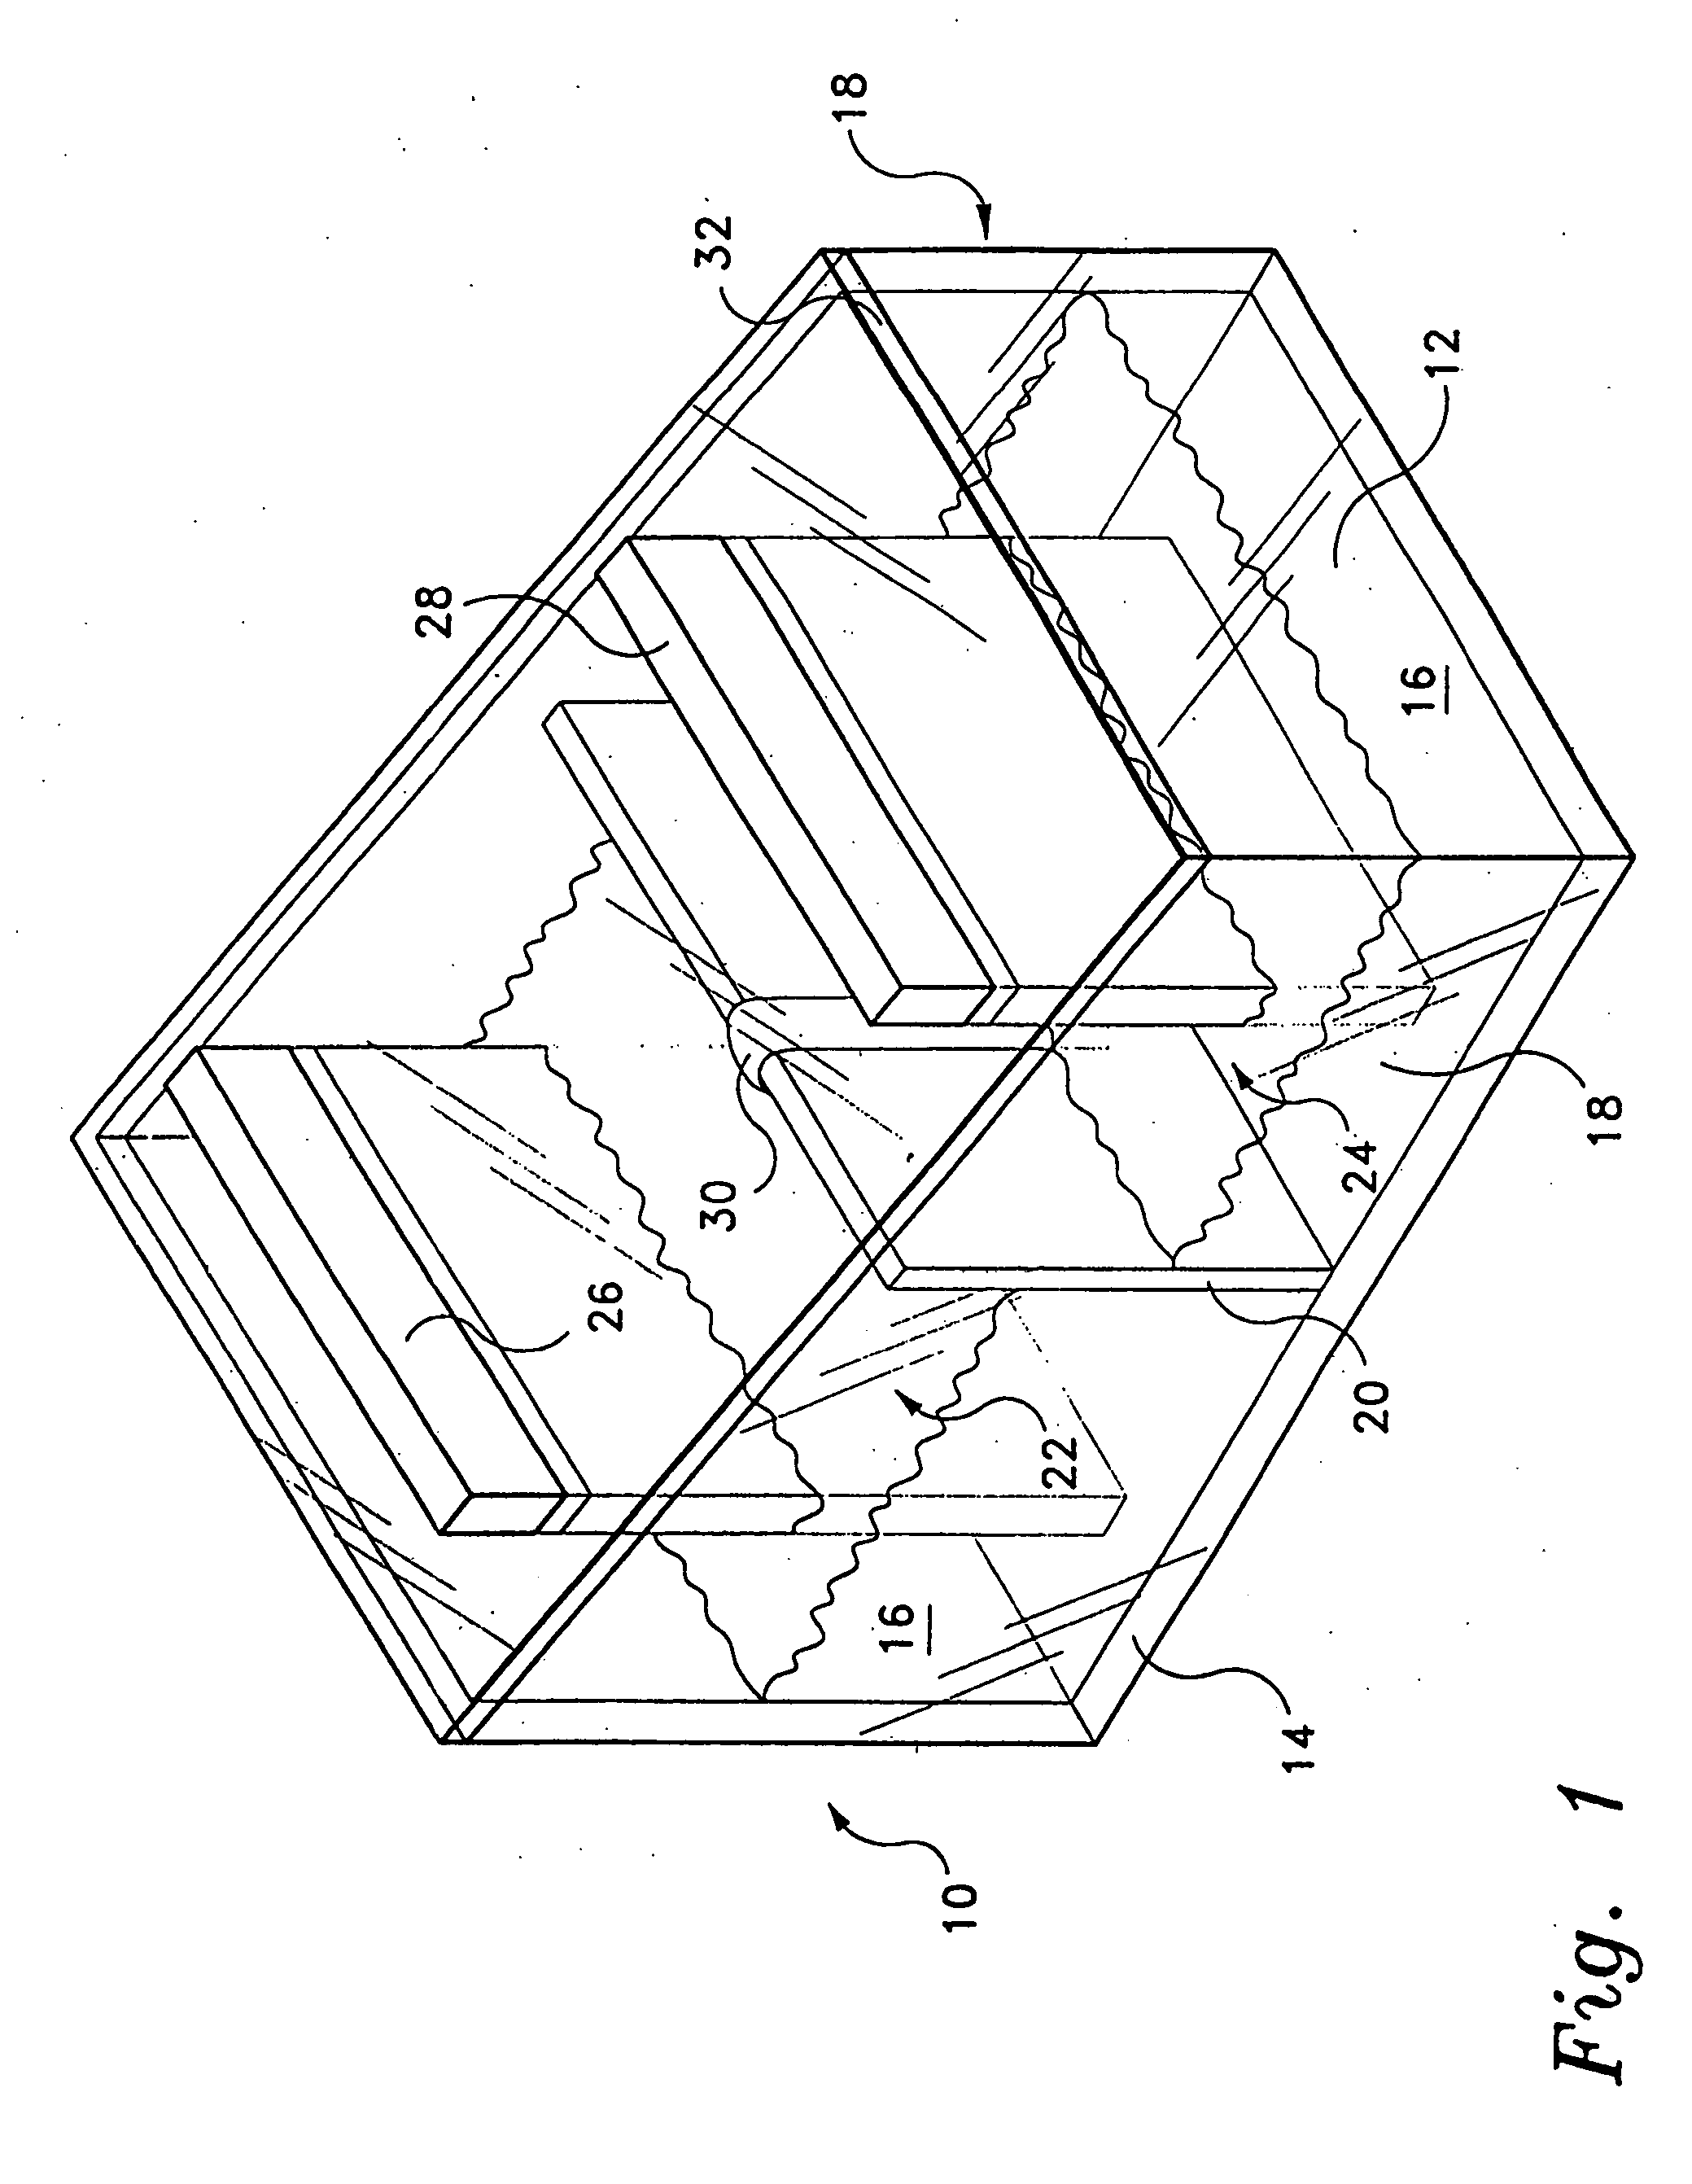 Solar driven concentration cell